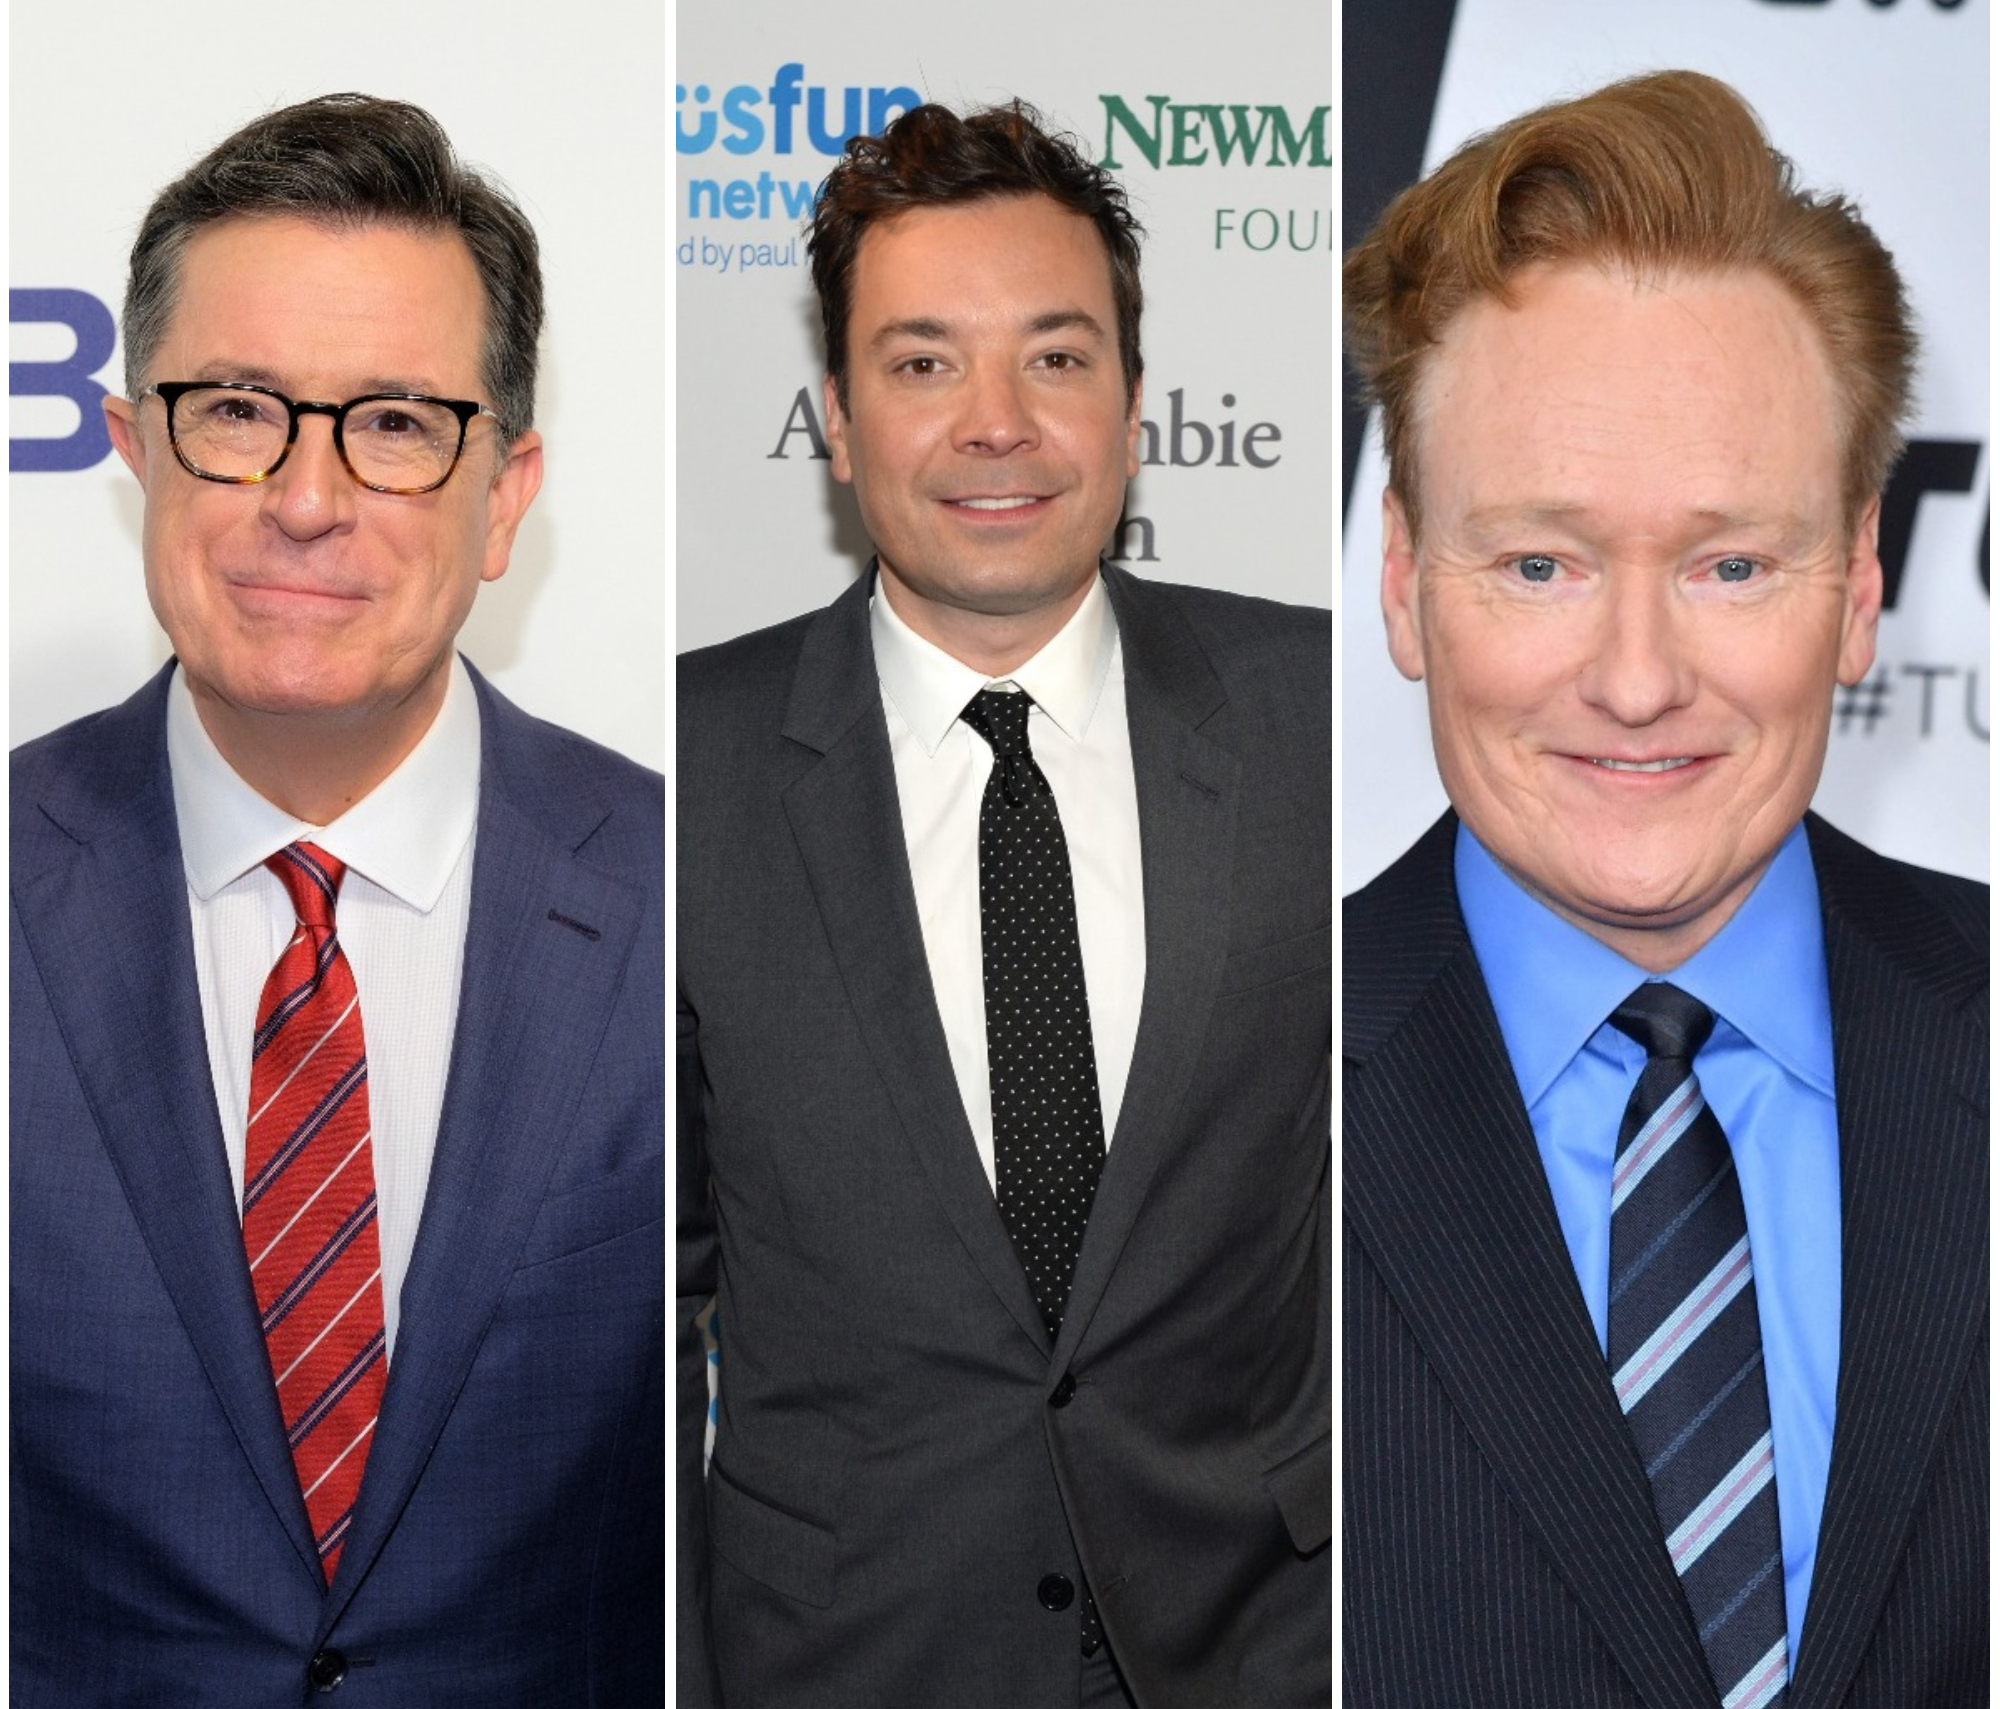 Late-night hosts Stephen Colbert, left, Jimmy Fallon and Conan O'Brien teamed up Tuesday for a video response to President Trump's Monday insults.